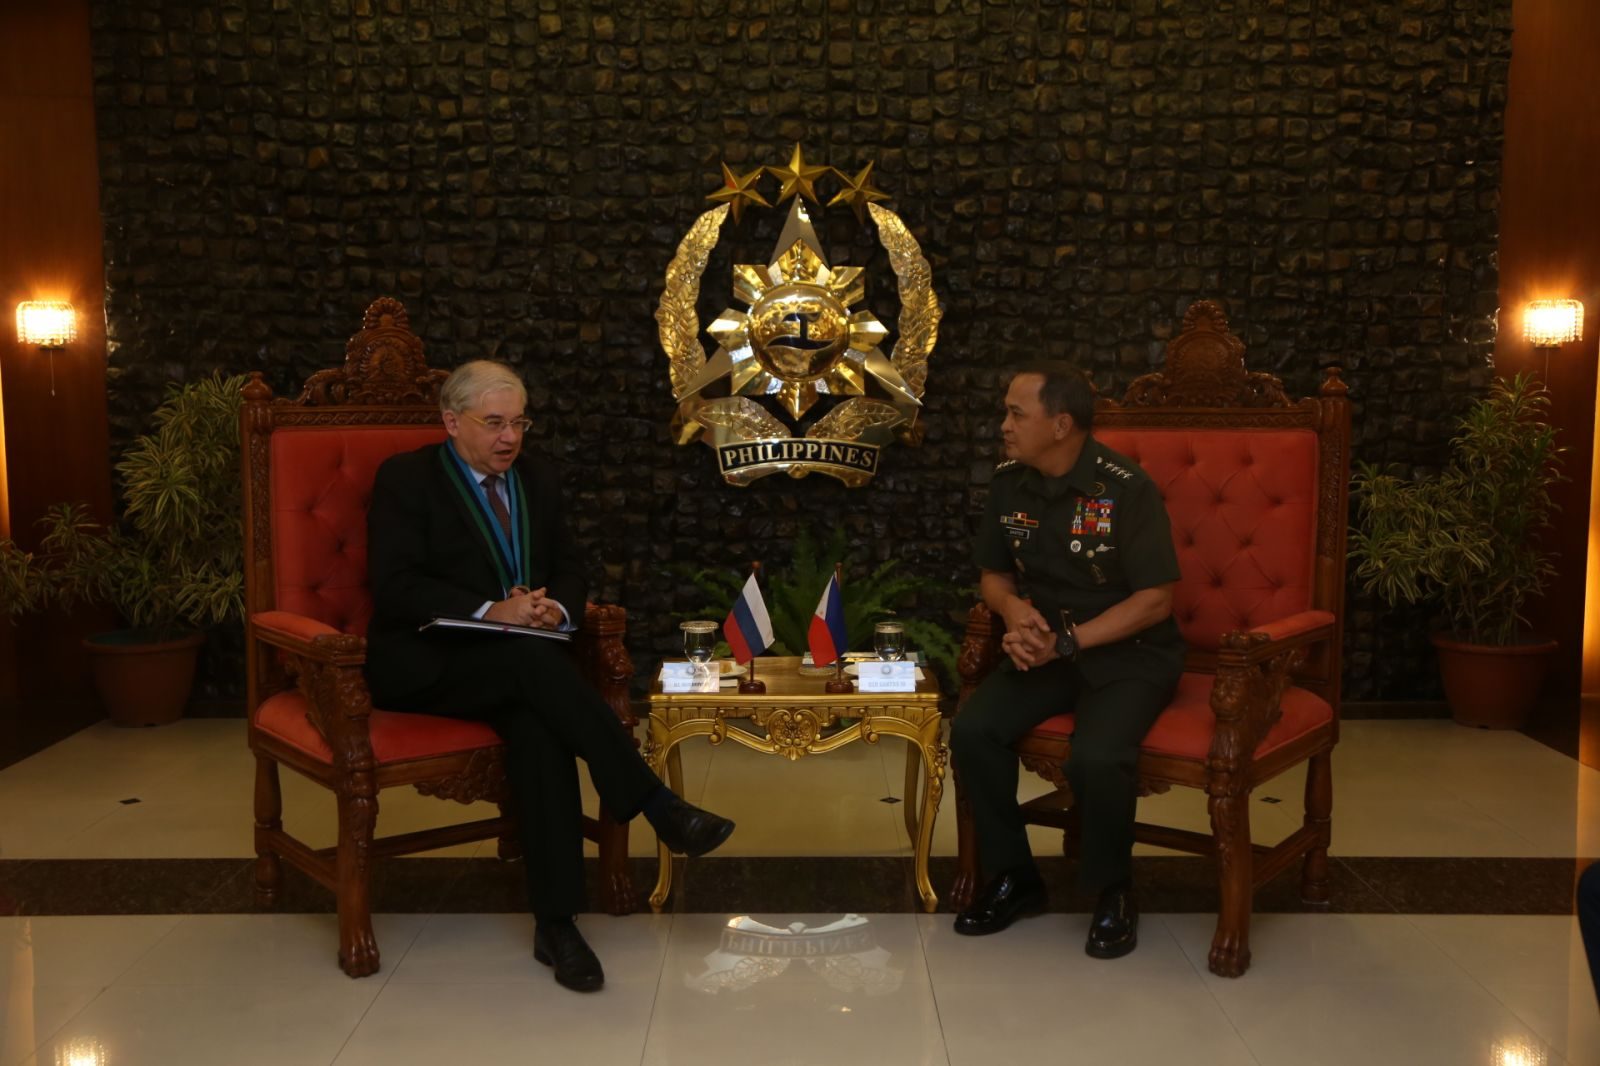 Russia denies envoy’s meeting with PH military chief related to VFA repeal